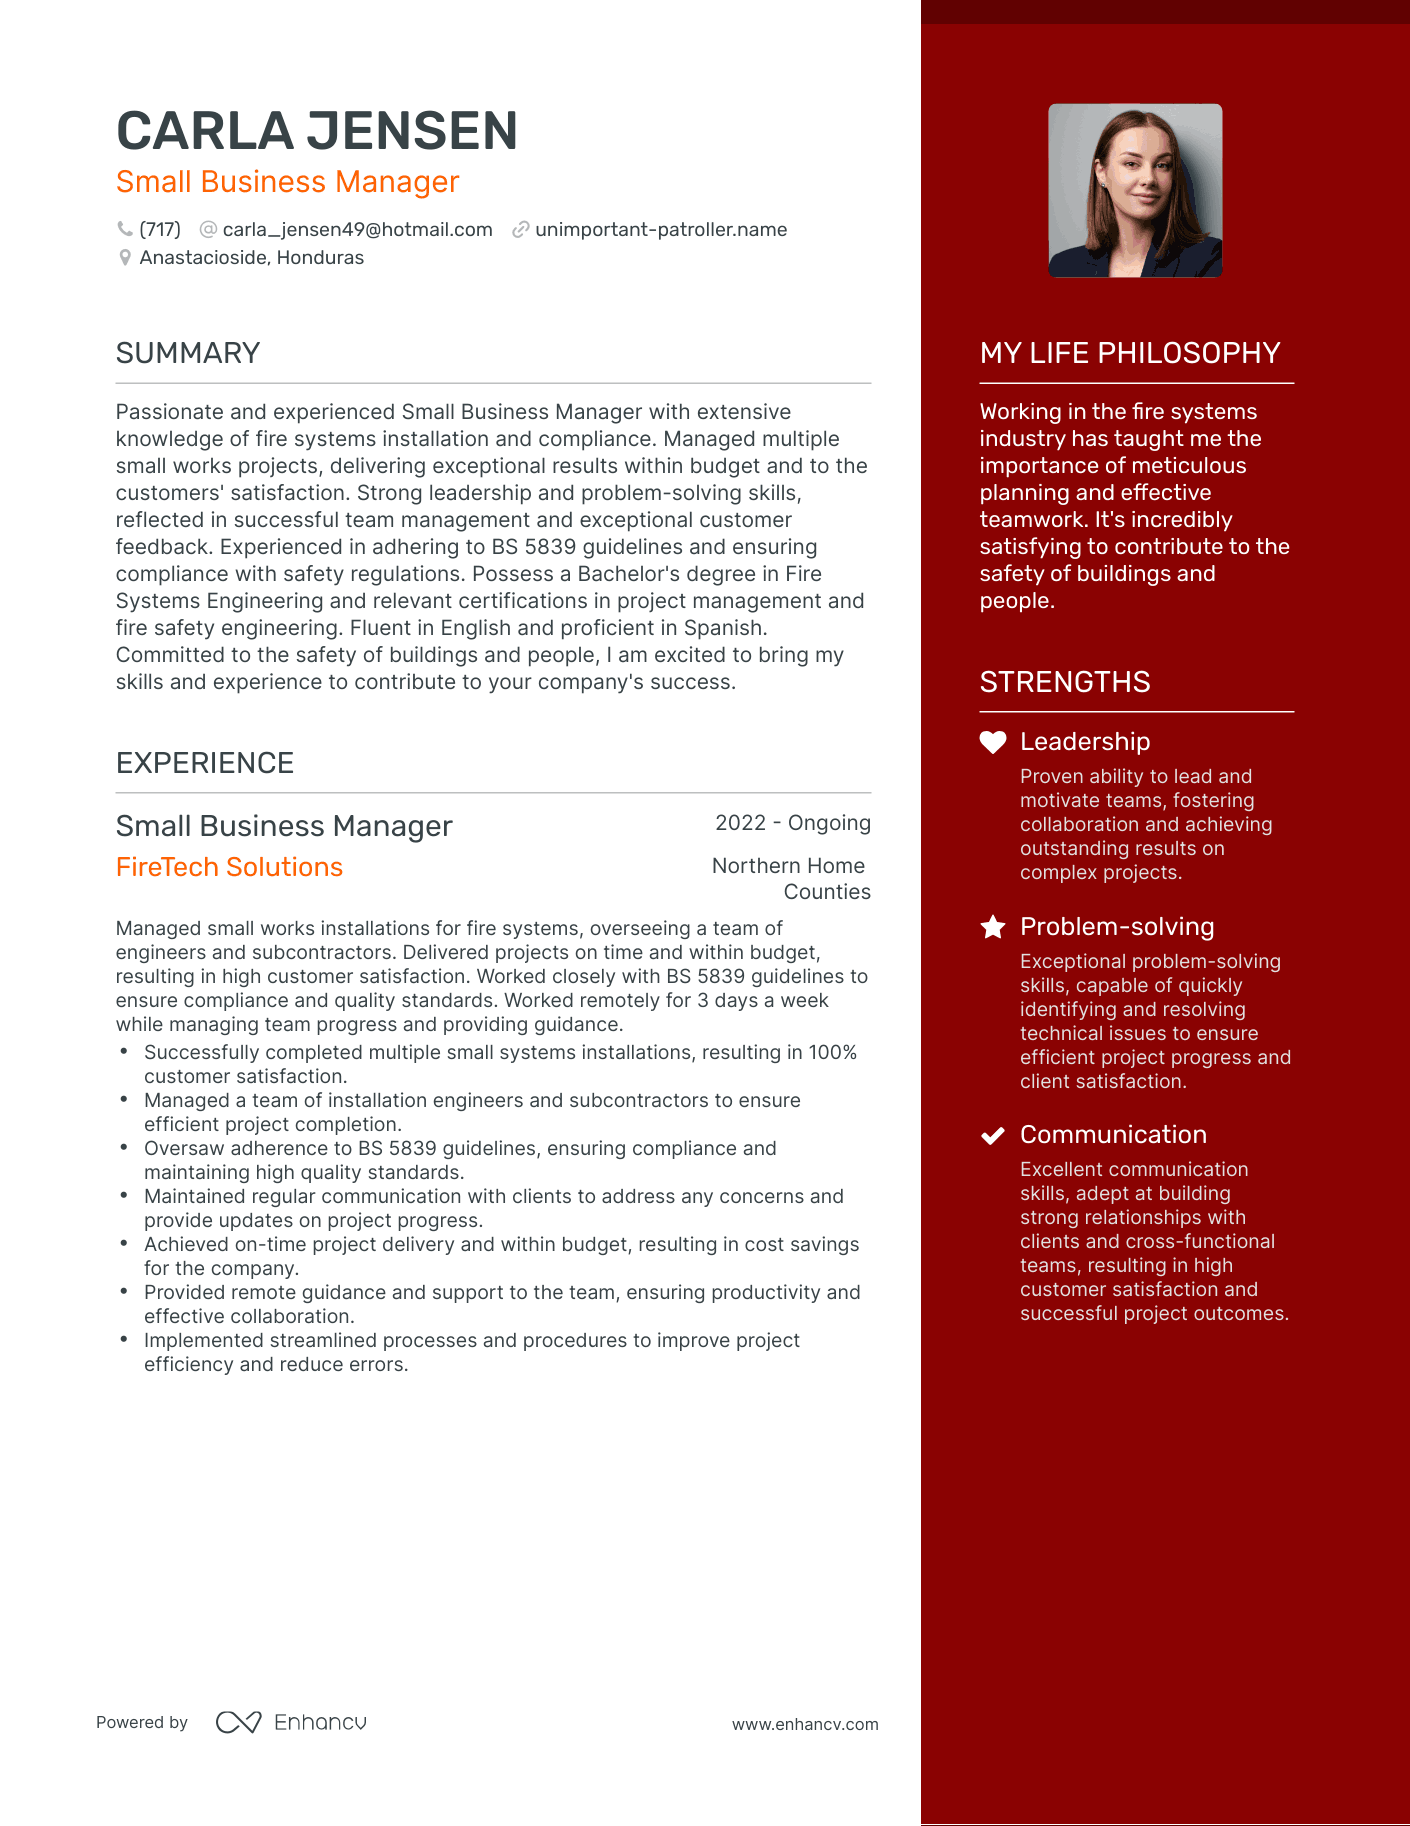 Small Business Manager resume example